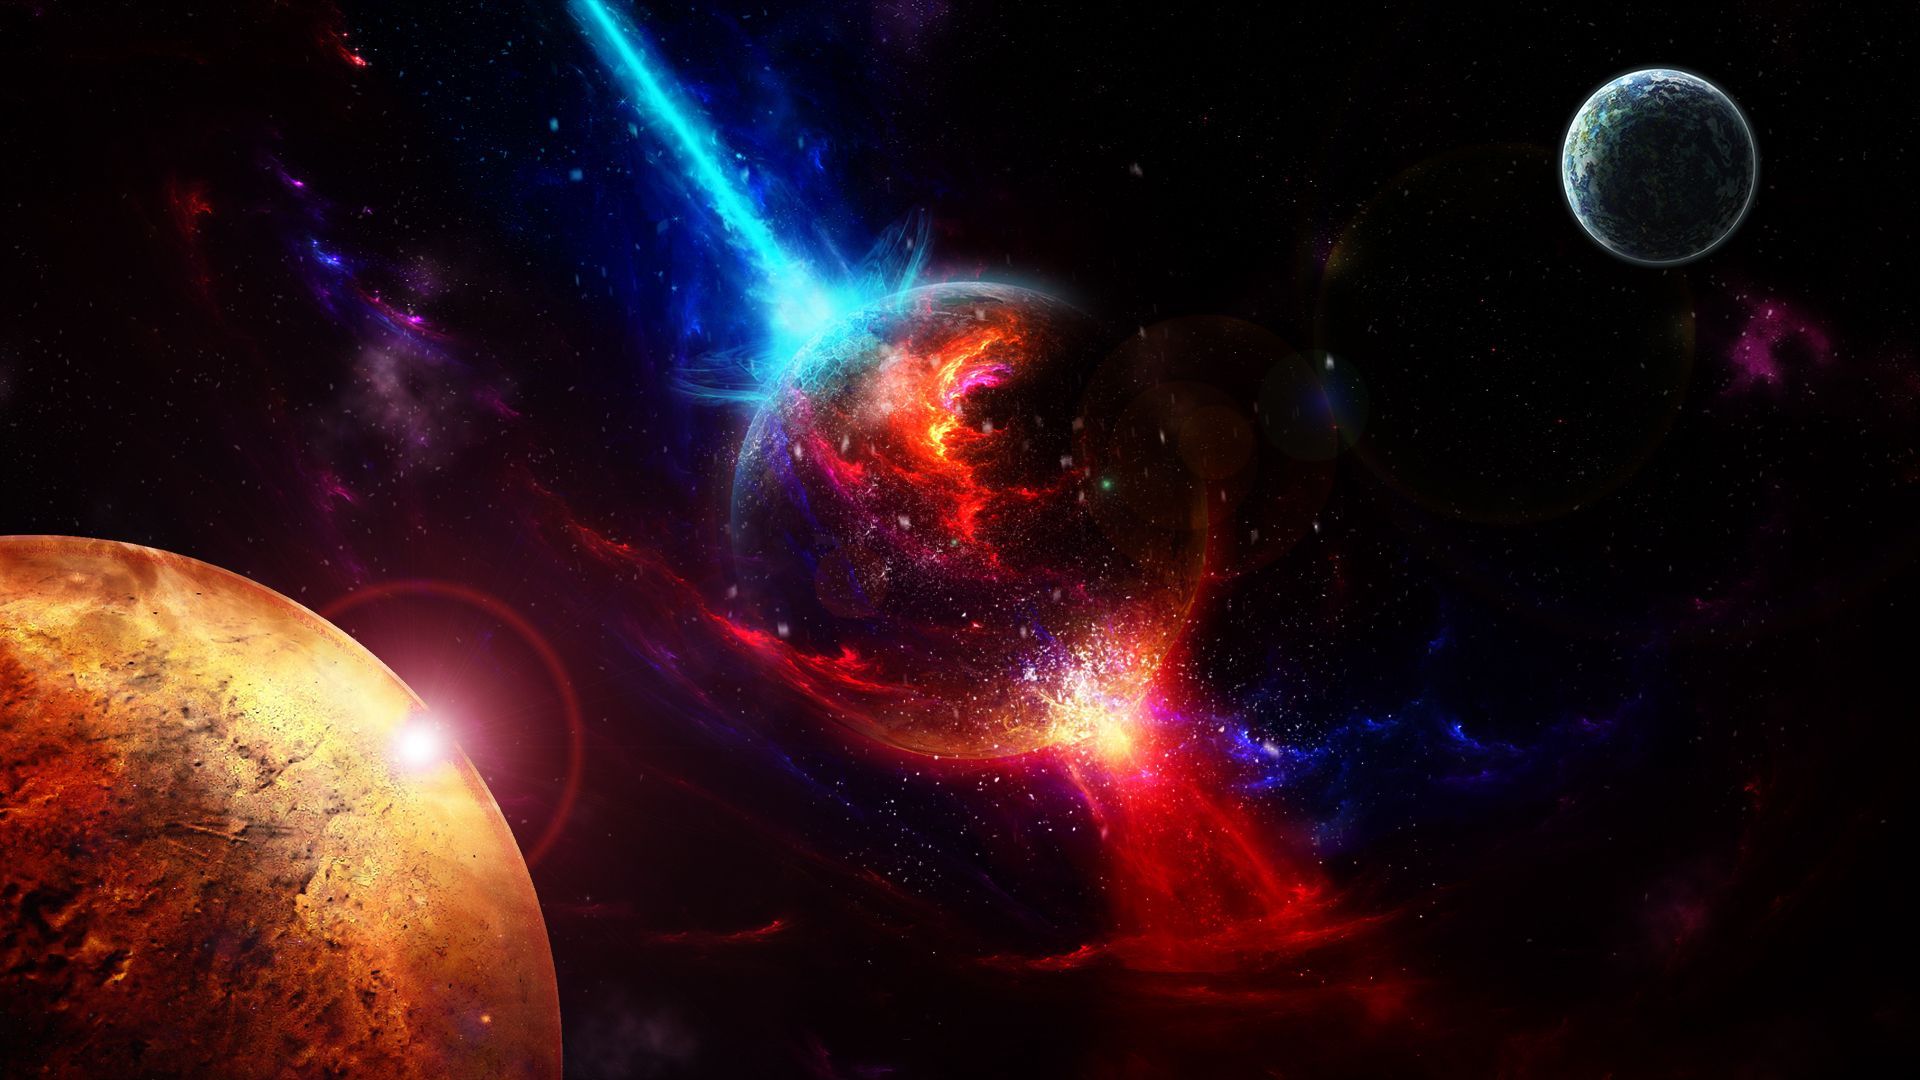 Planet exploding HD wallpaper. Wallpaper space, Space art, Space planets